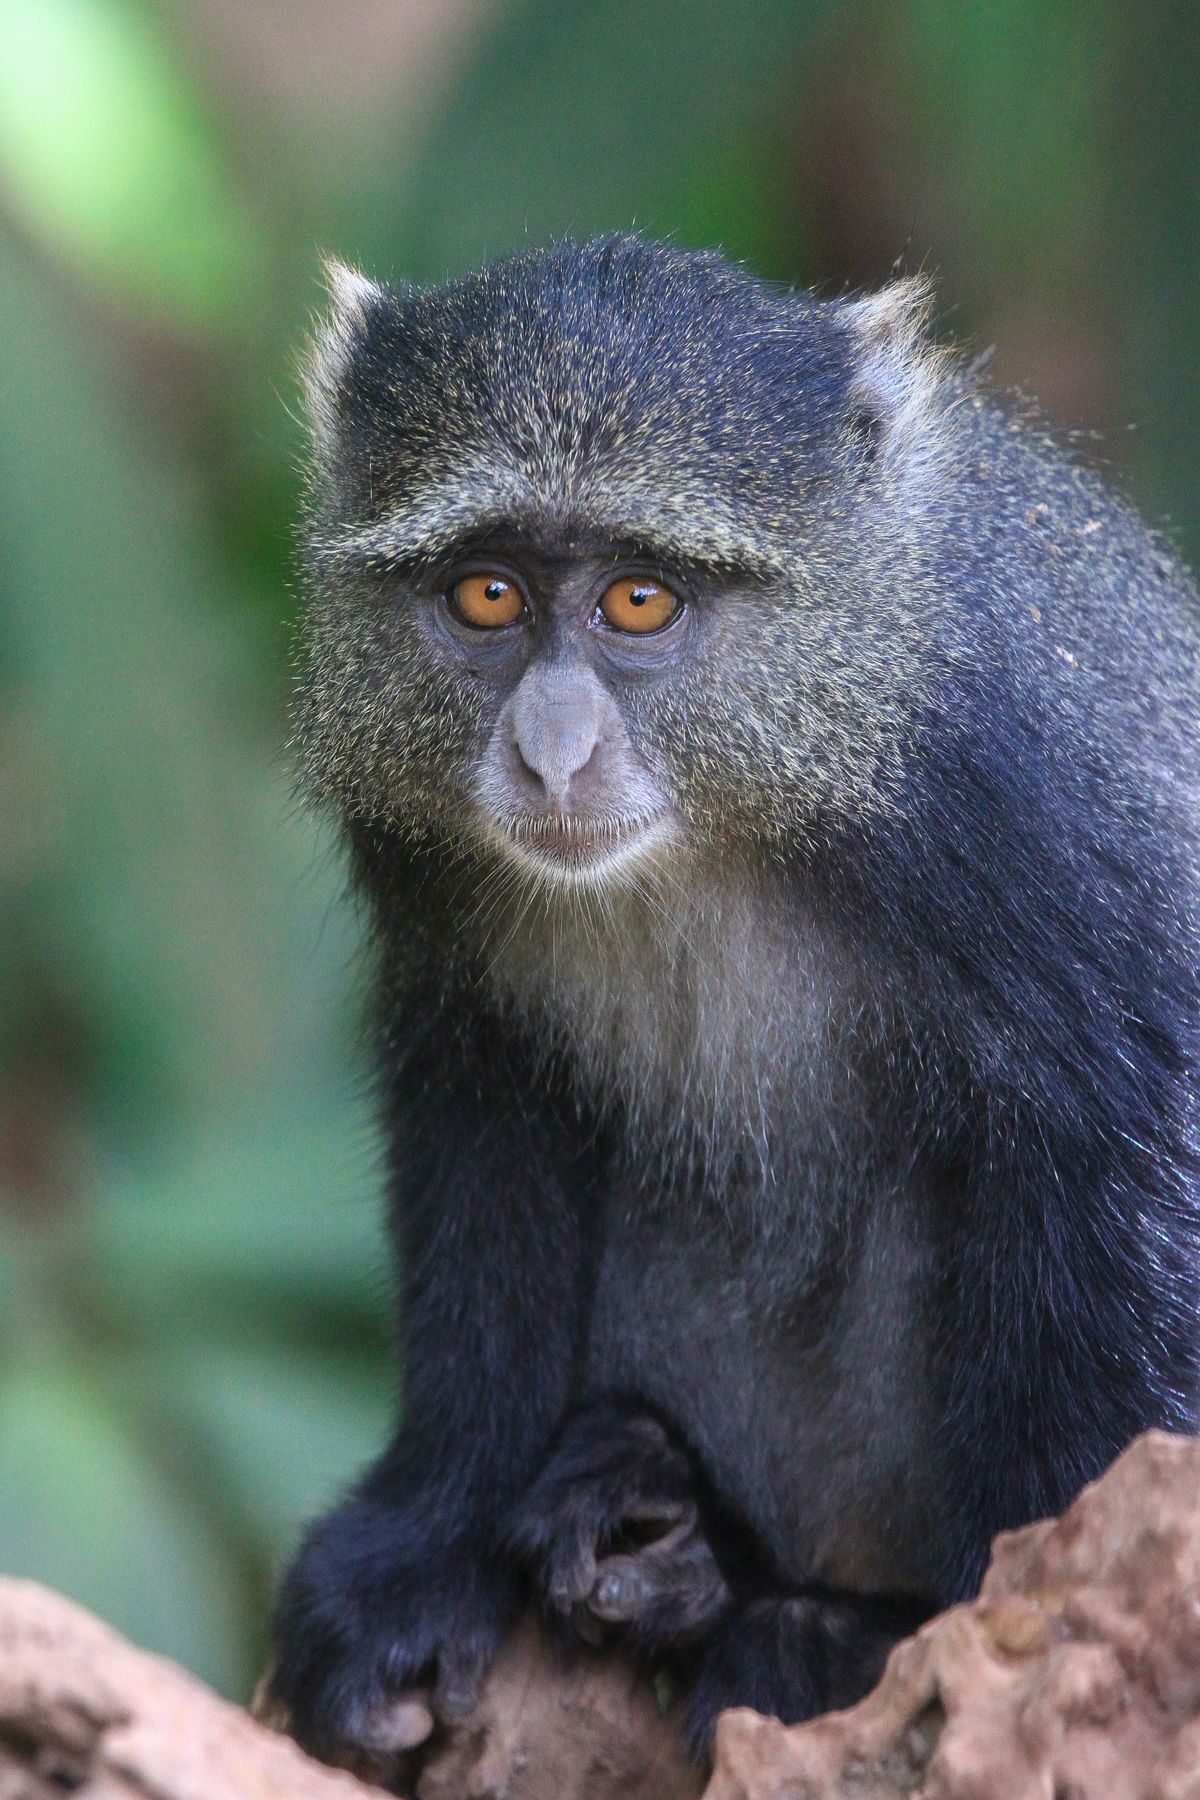 And the shy Blue Monkey